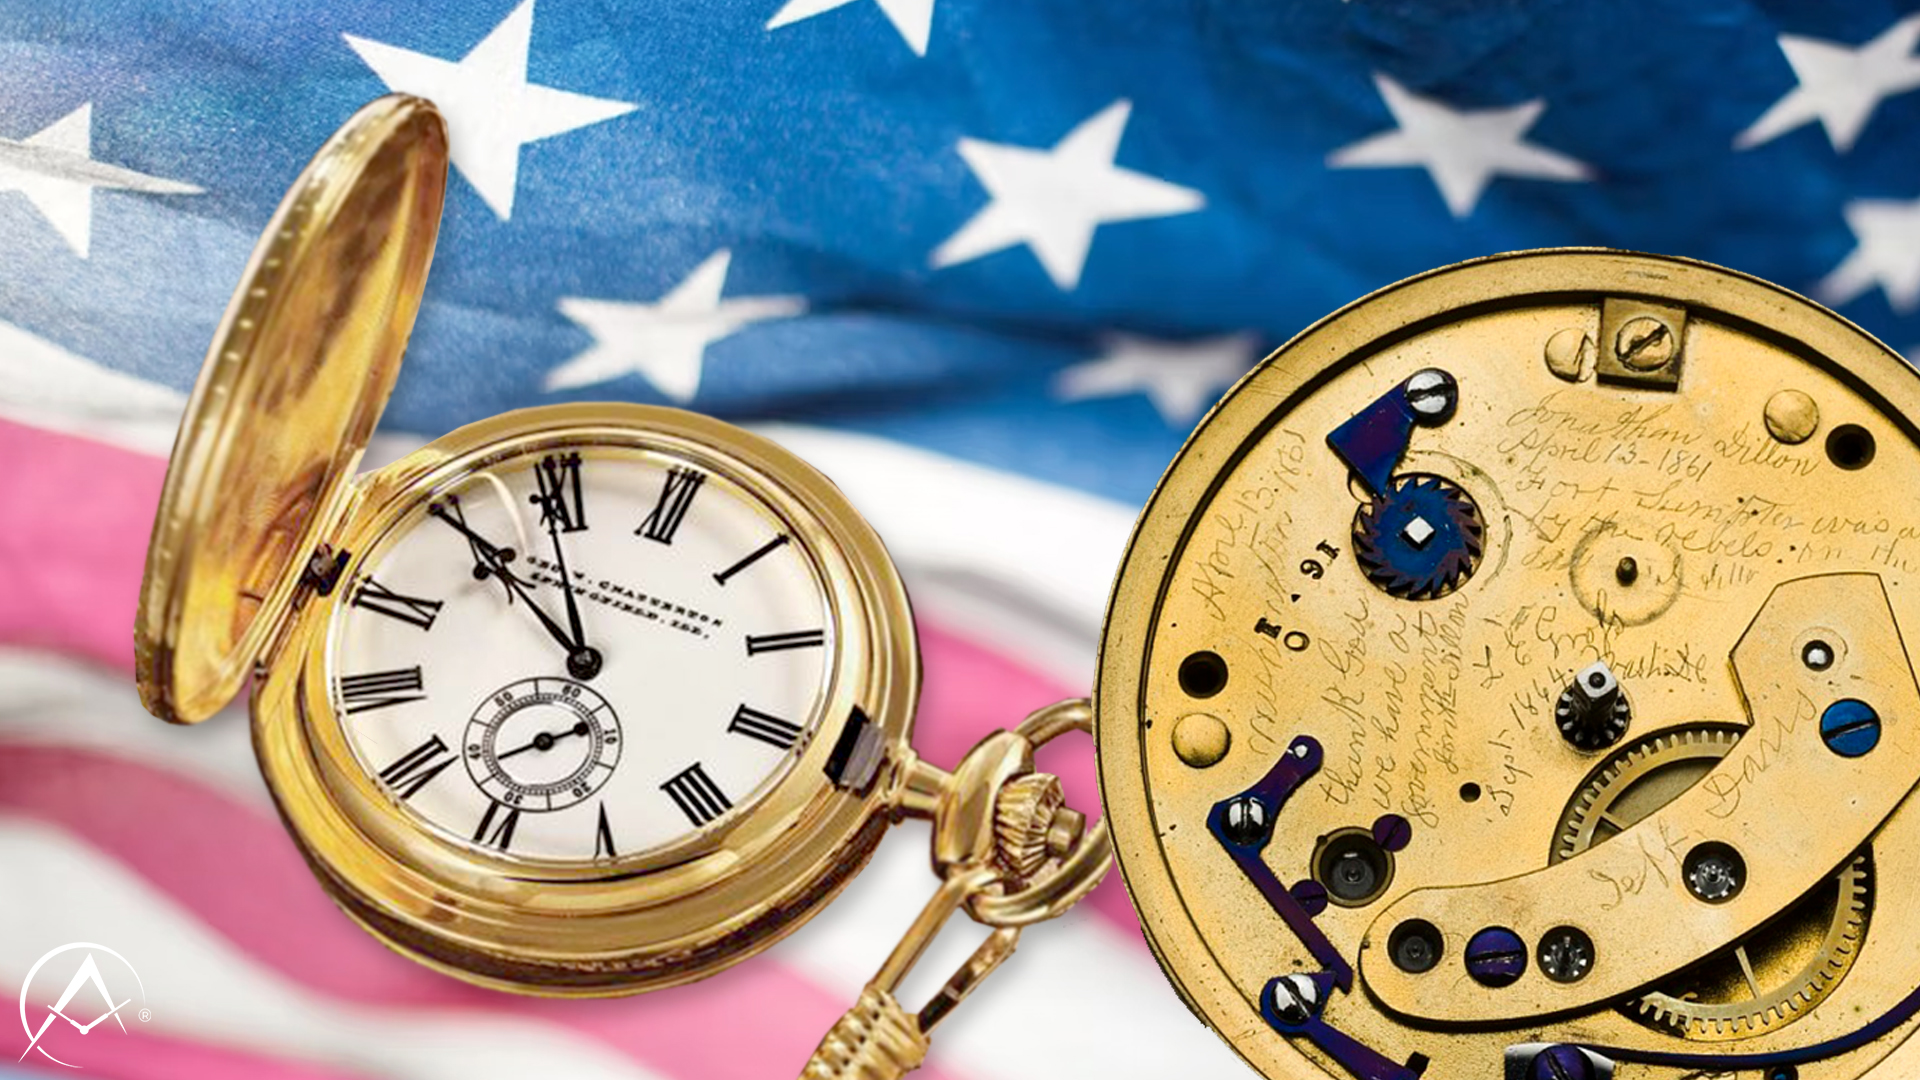 A Gold Stopwatch with White Dial and Black Numerals Sits Open Next to an Engraved Golden Caseback with an American Flag on the Background.